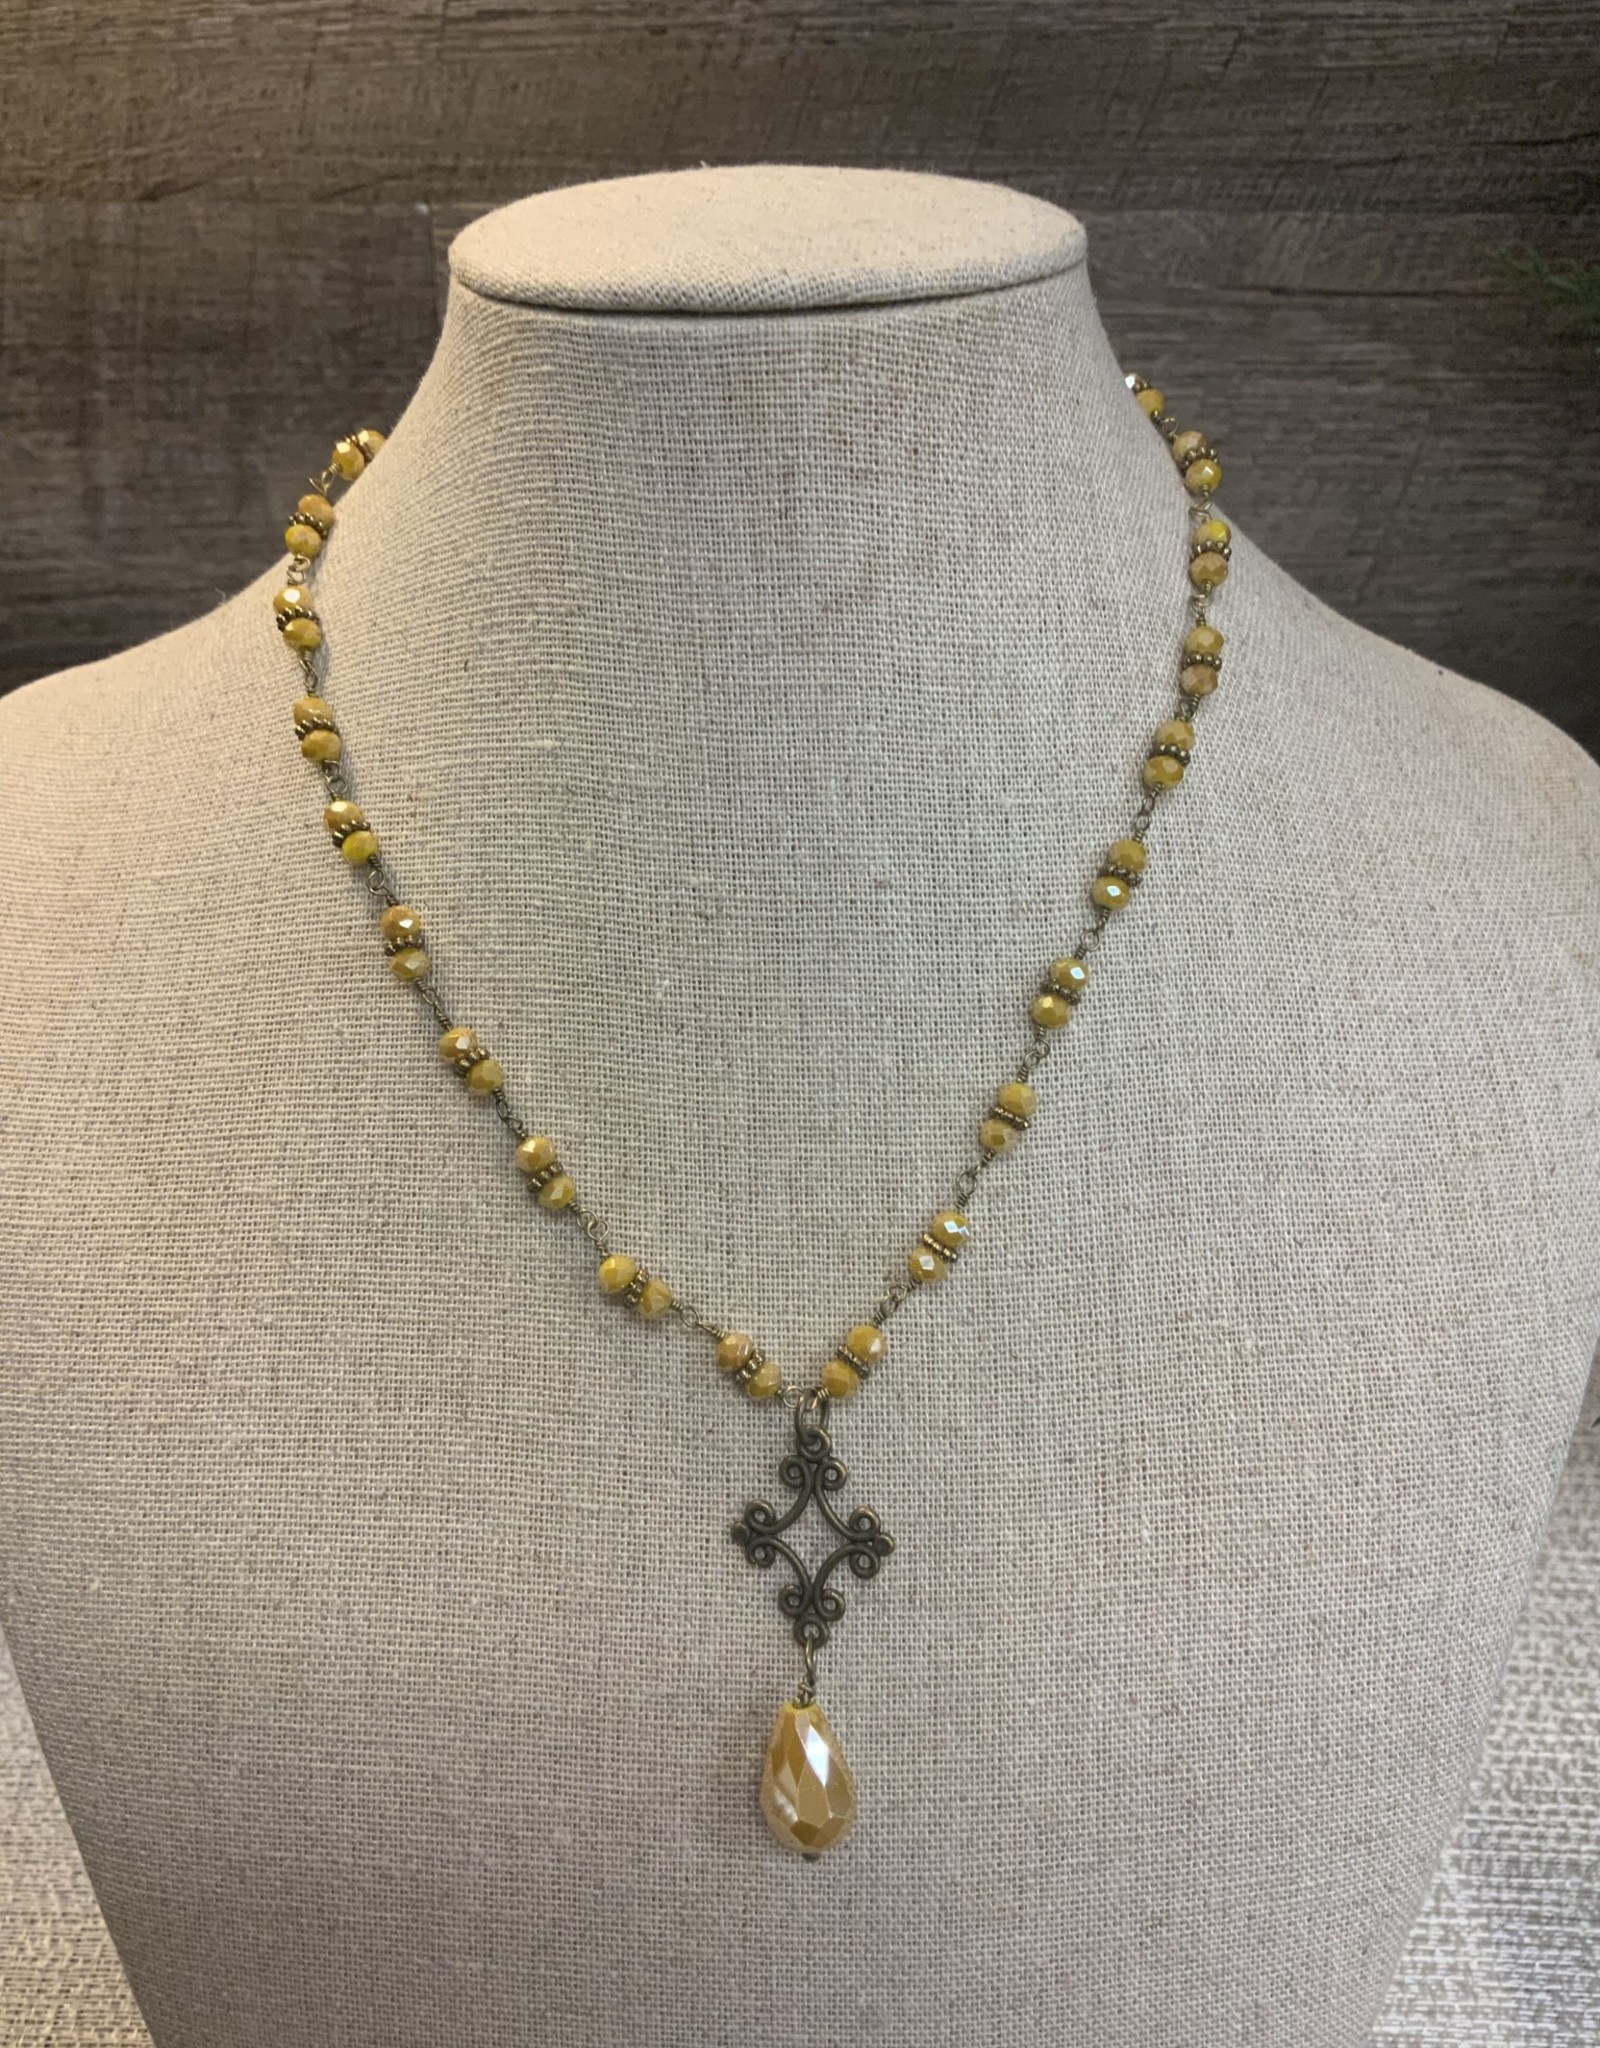 - Golden Yellow Dainty Beaded Necklace with Drop Pendant